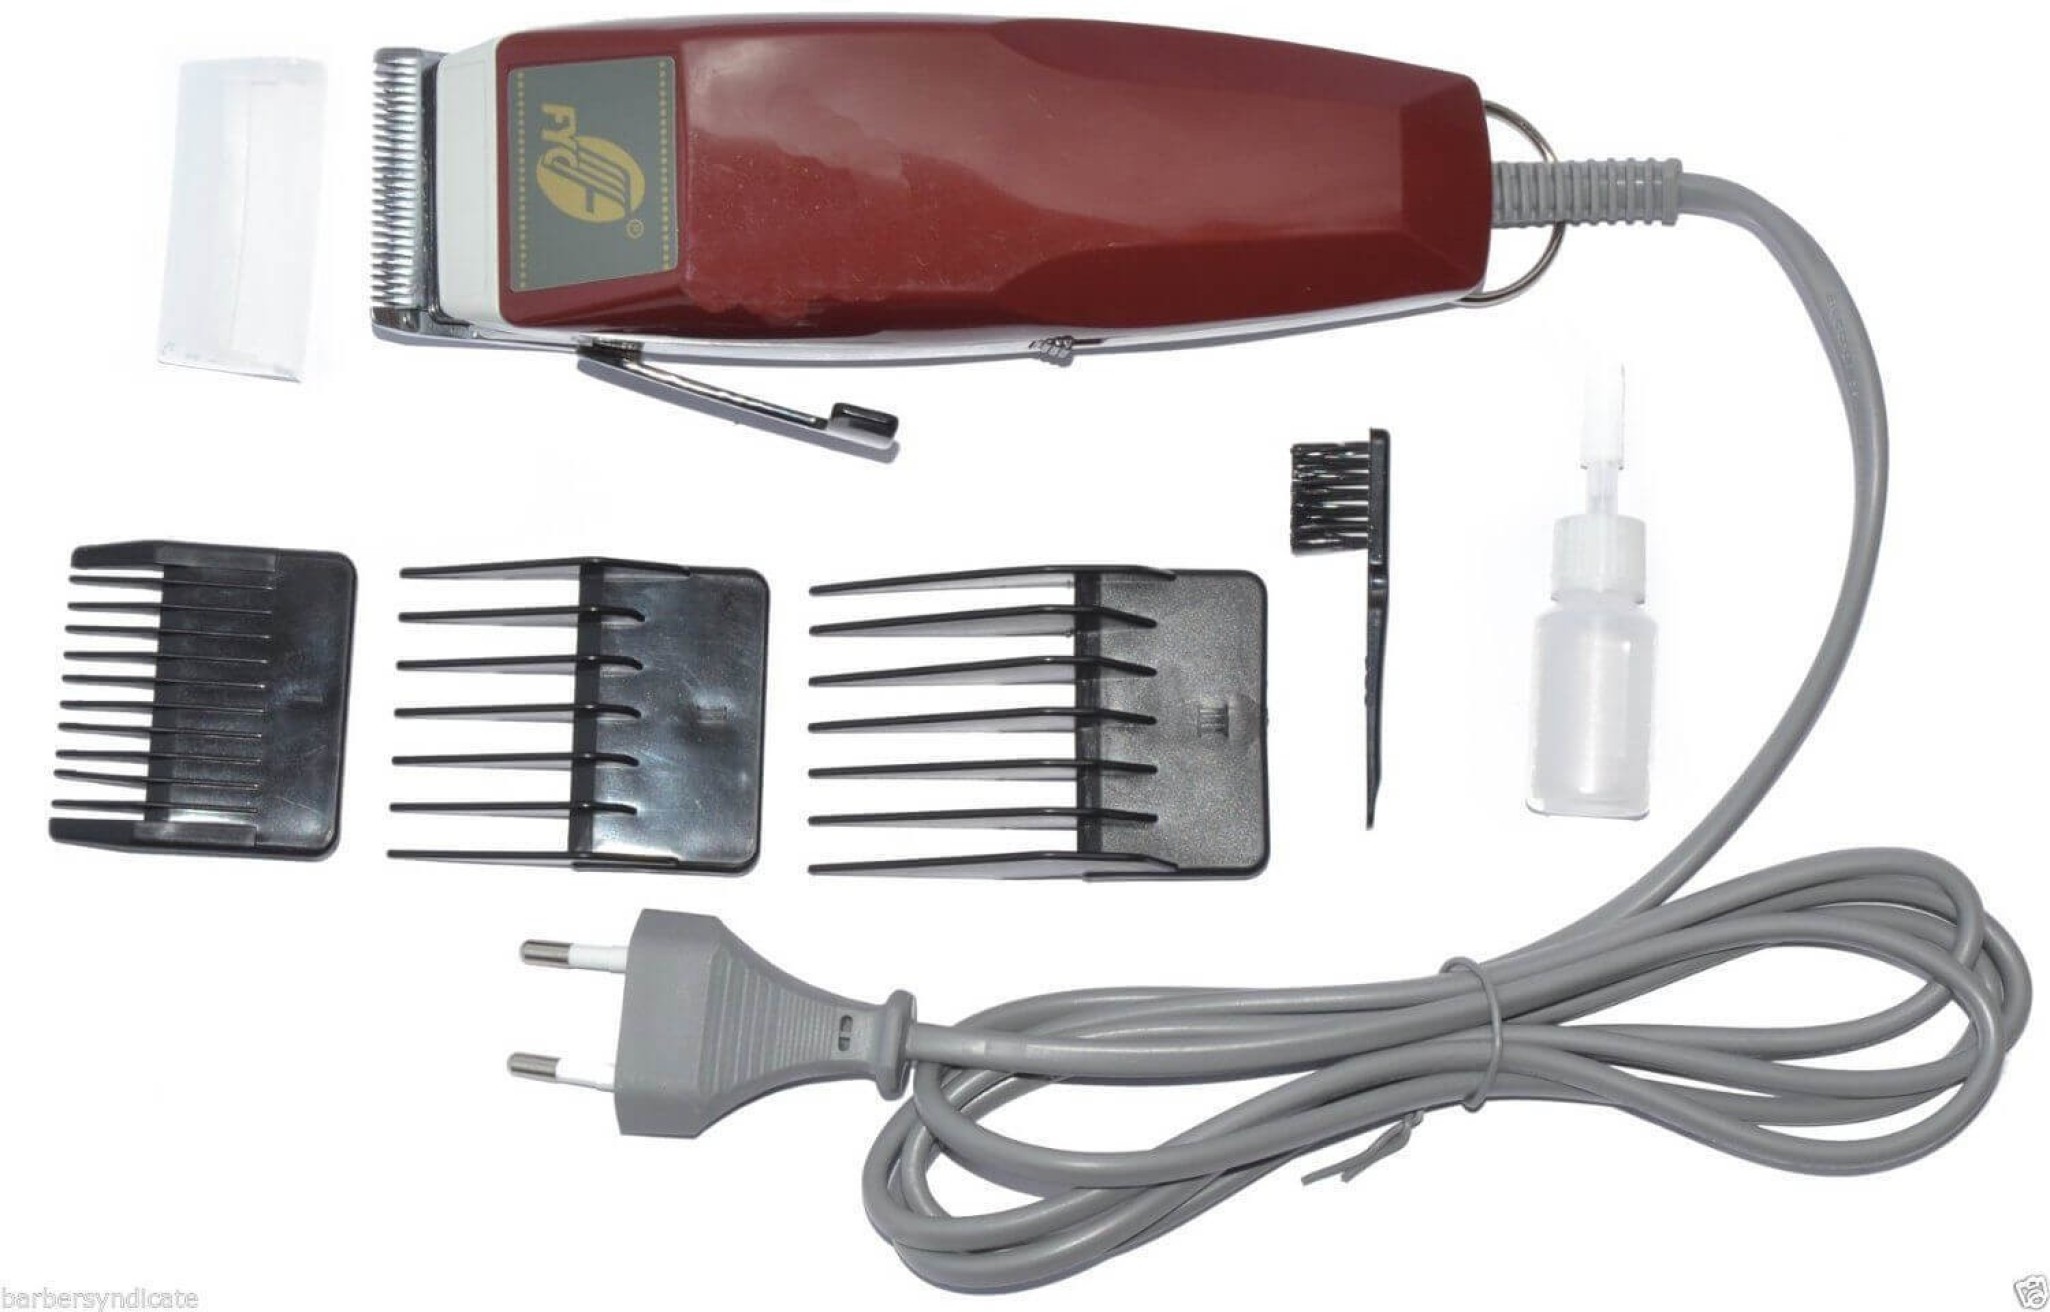 Buy Mens Hair Trimmer Online at Best Price in India on Naaptolcom